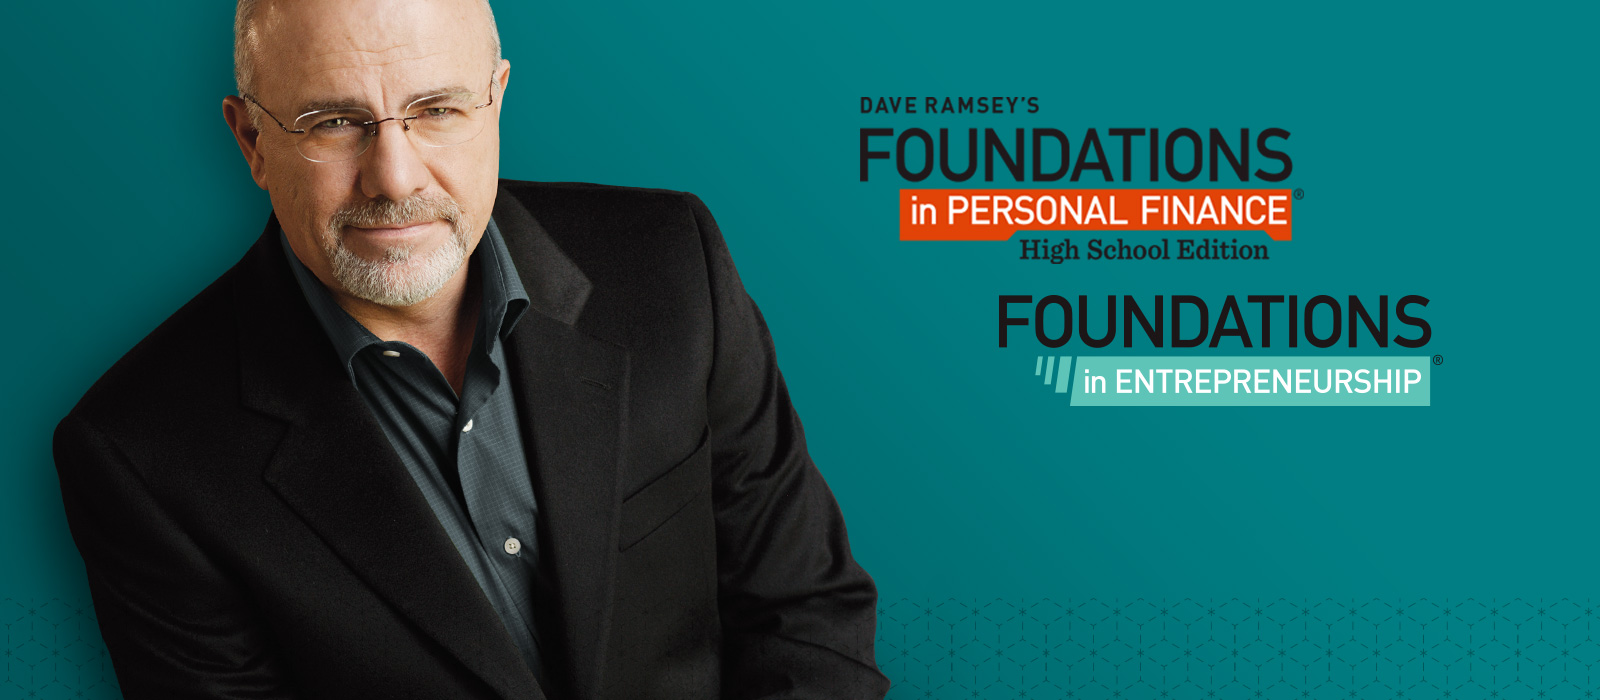 Dave Ramsey’s Foundations in Personal Finance